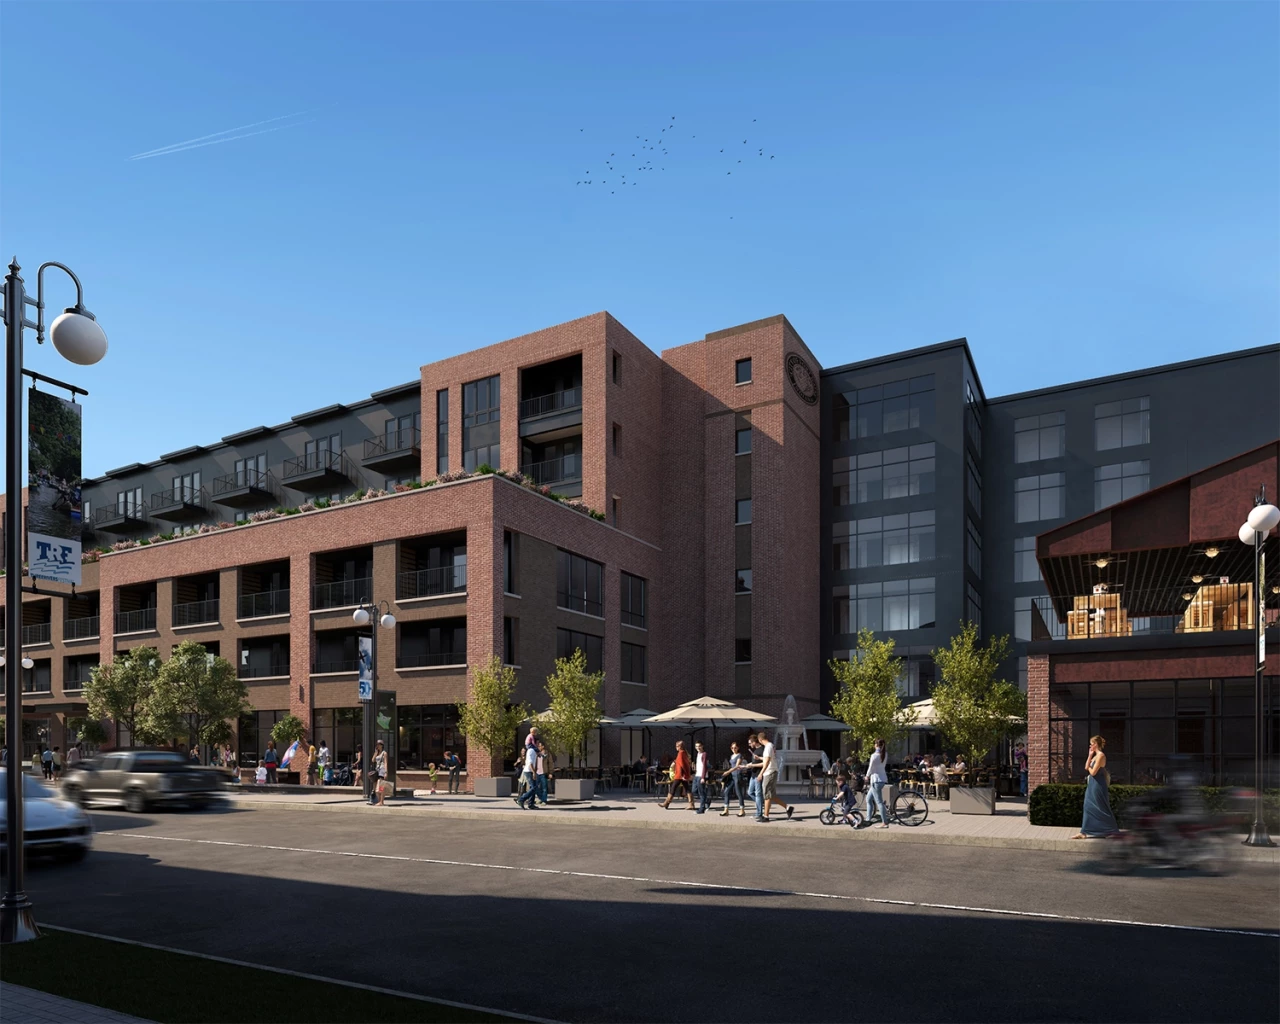 The Lofts at Headwaters - Rendering Courtesy of Barrett & Stokley